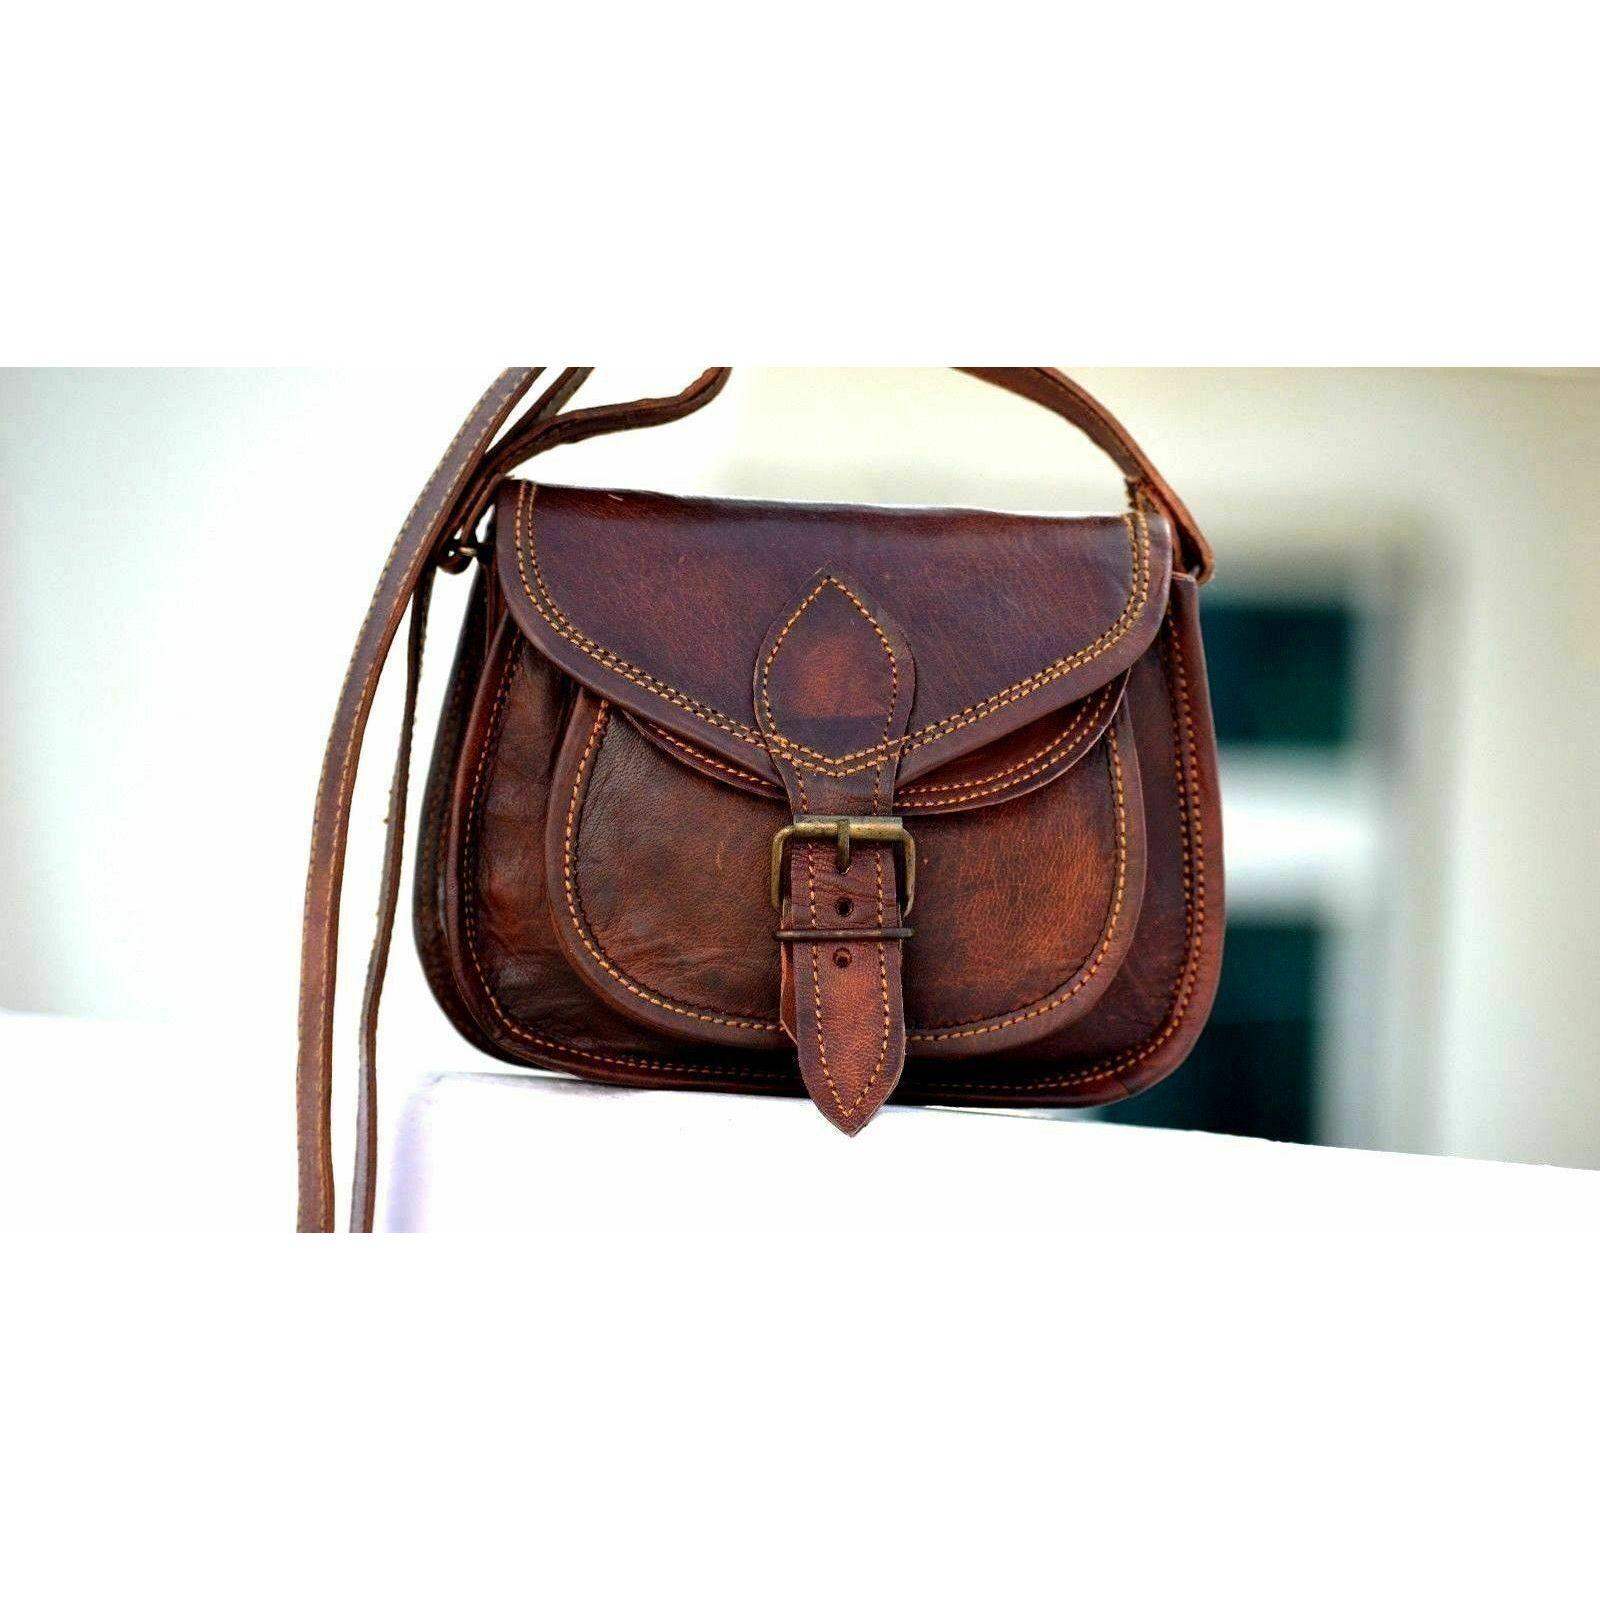 Vintage Goat leather Bags Women's Genuine Goat Leather Cross body Shopping Handmade Bag Brown Purse New